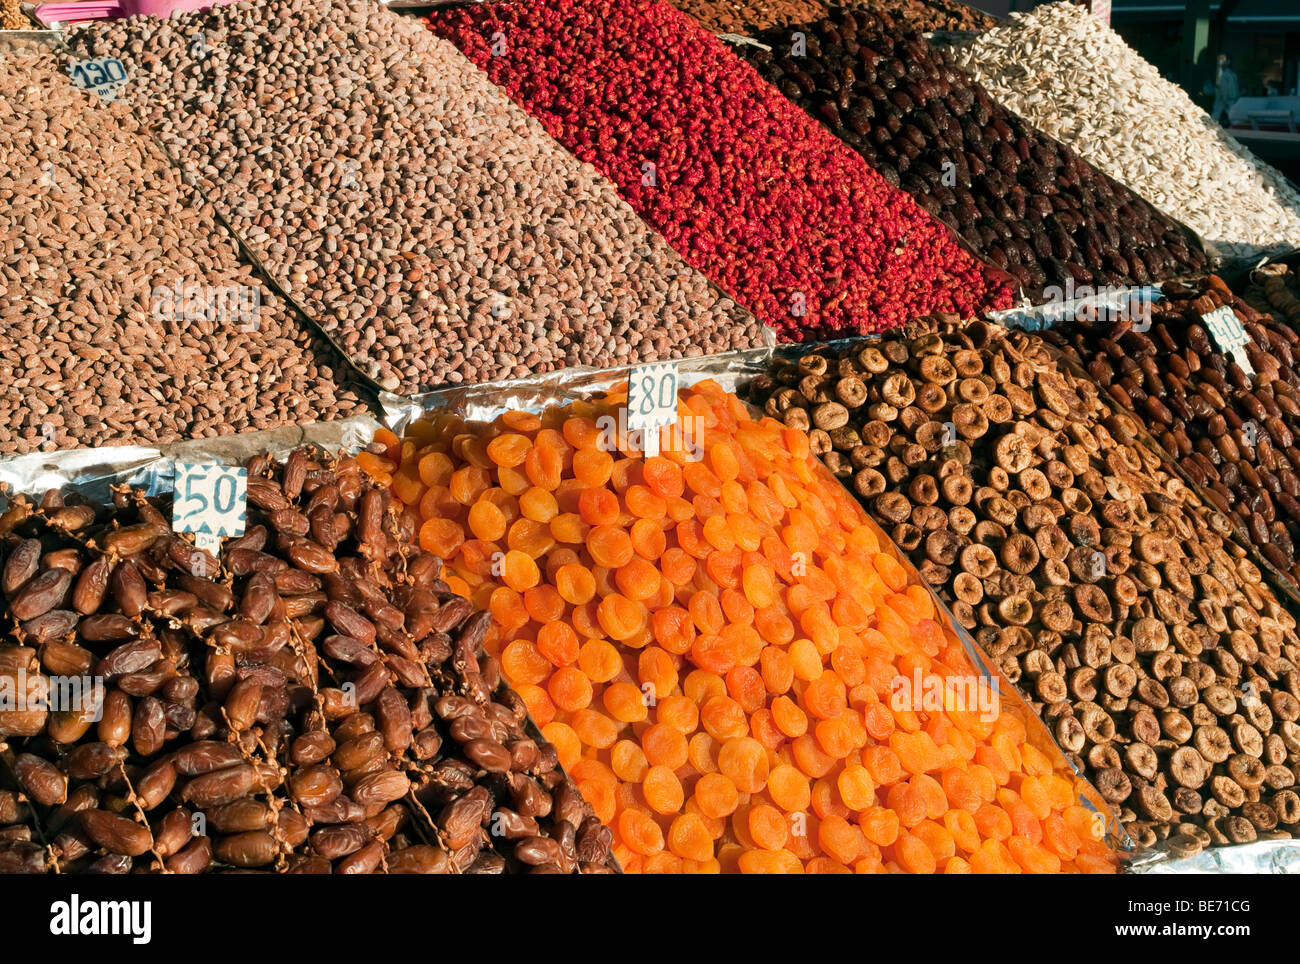 Dried fruit, nuts and dates in a market, Djemaa el-fna Marrakech, Morocco, Africa Stock Photo